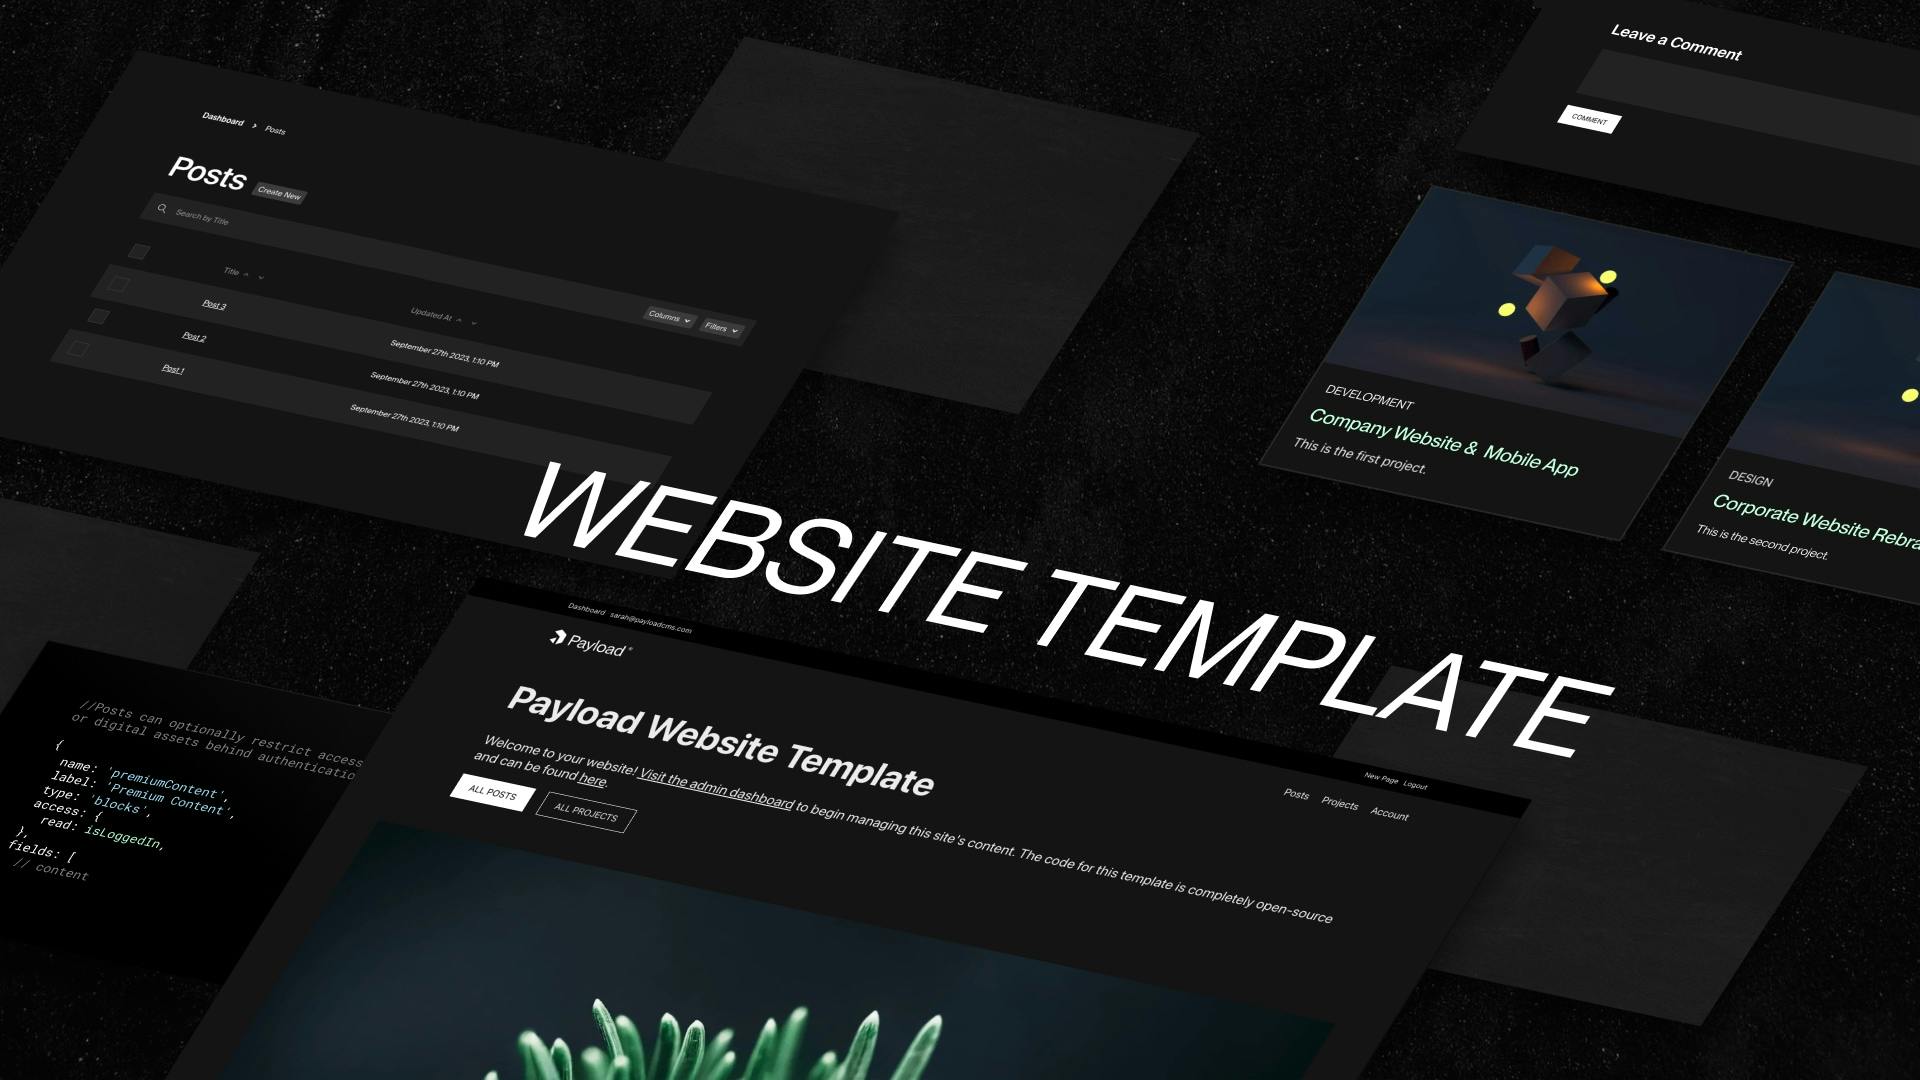 Website Template features and ui